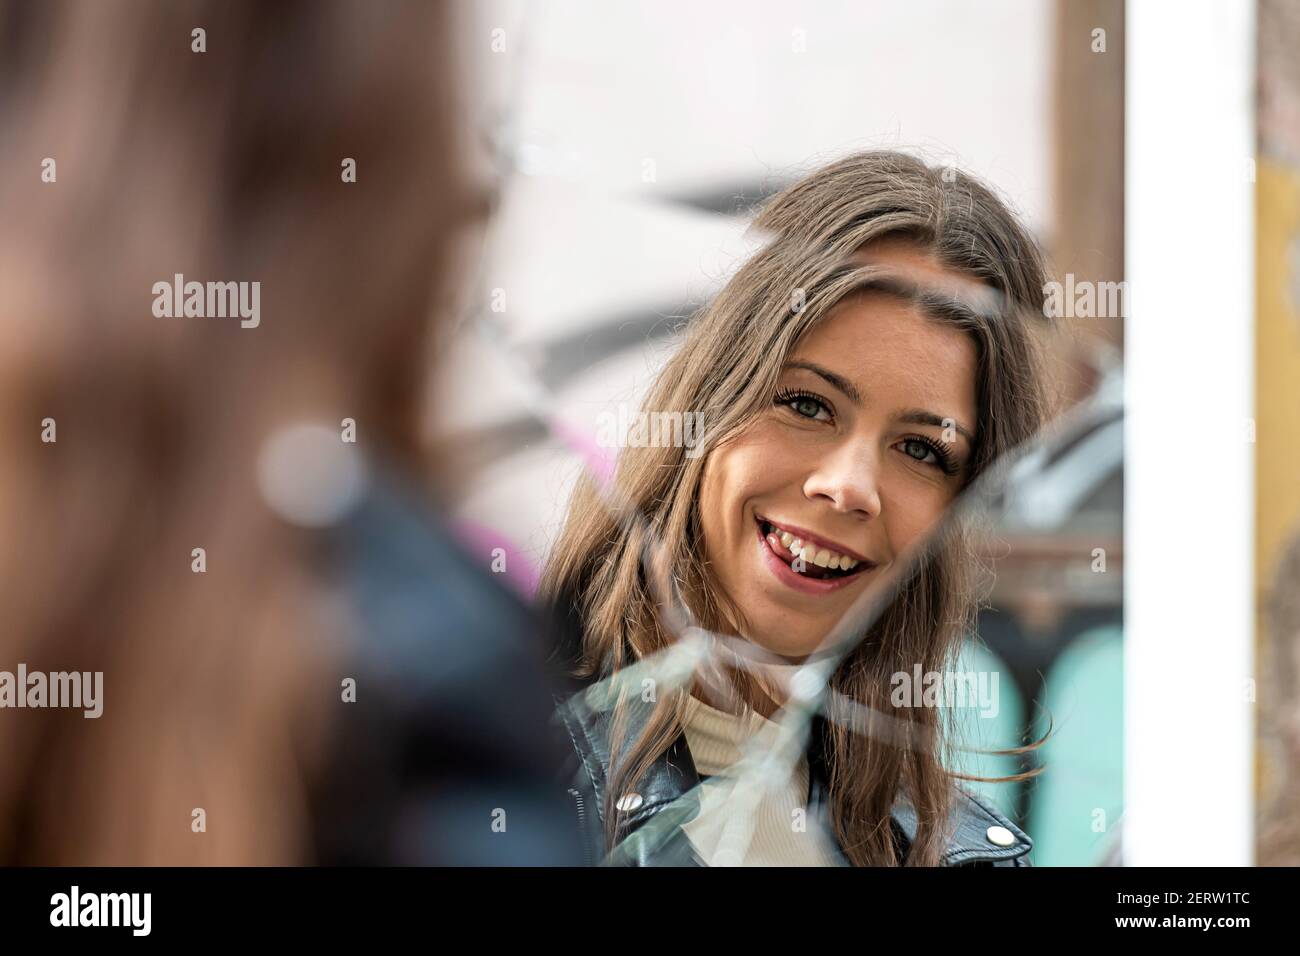 a young, positive woman looks at her reflection in a broken mirror Stock Photo